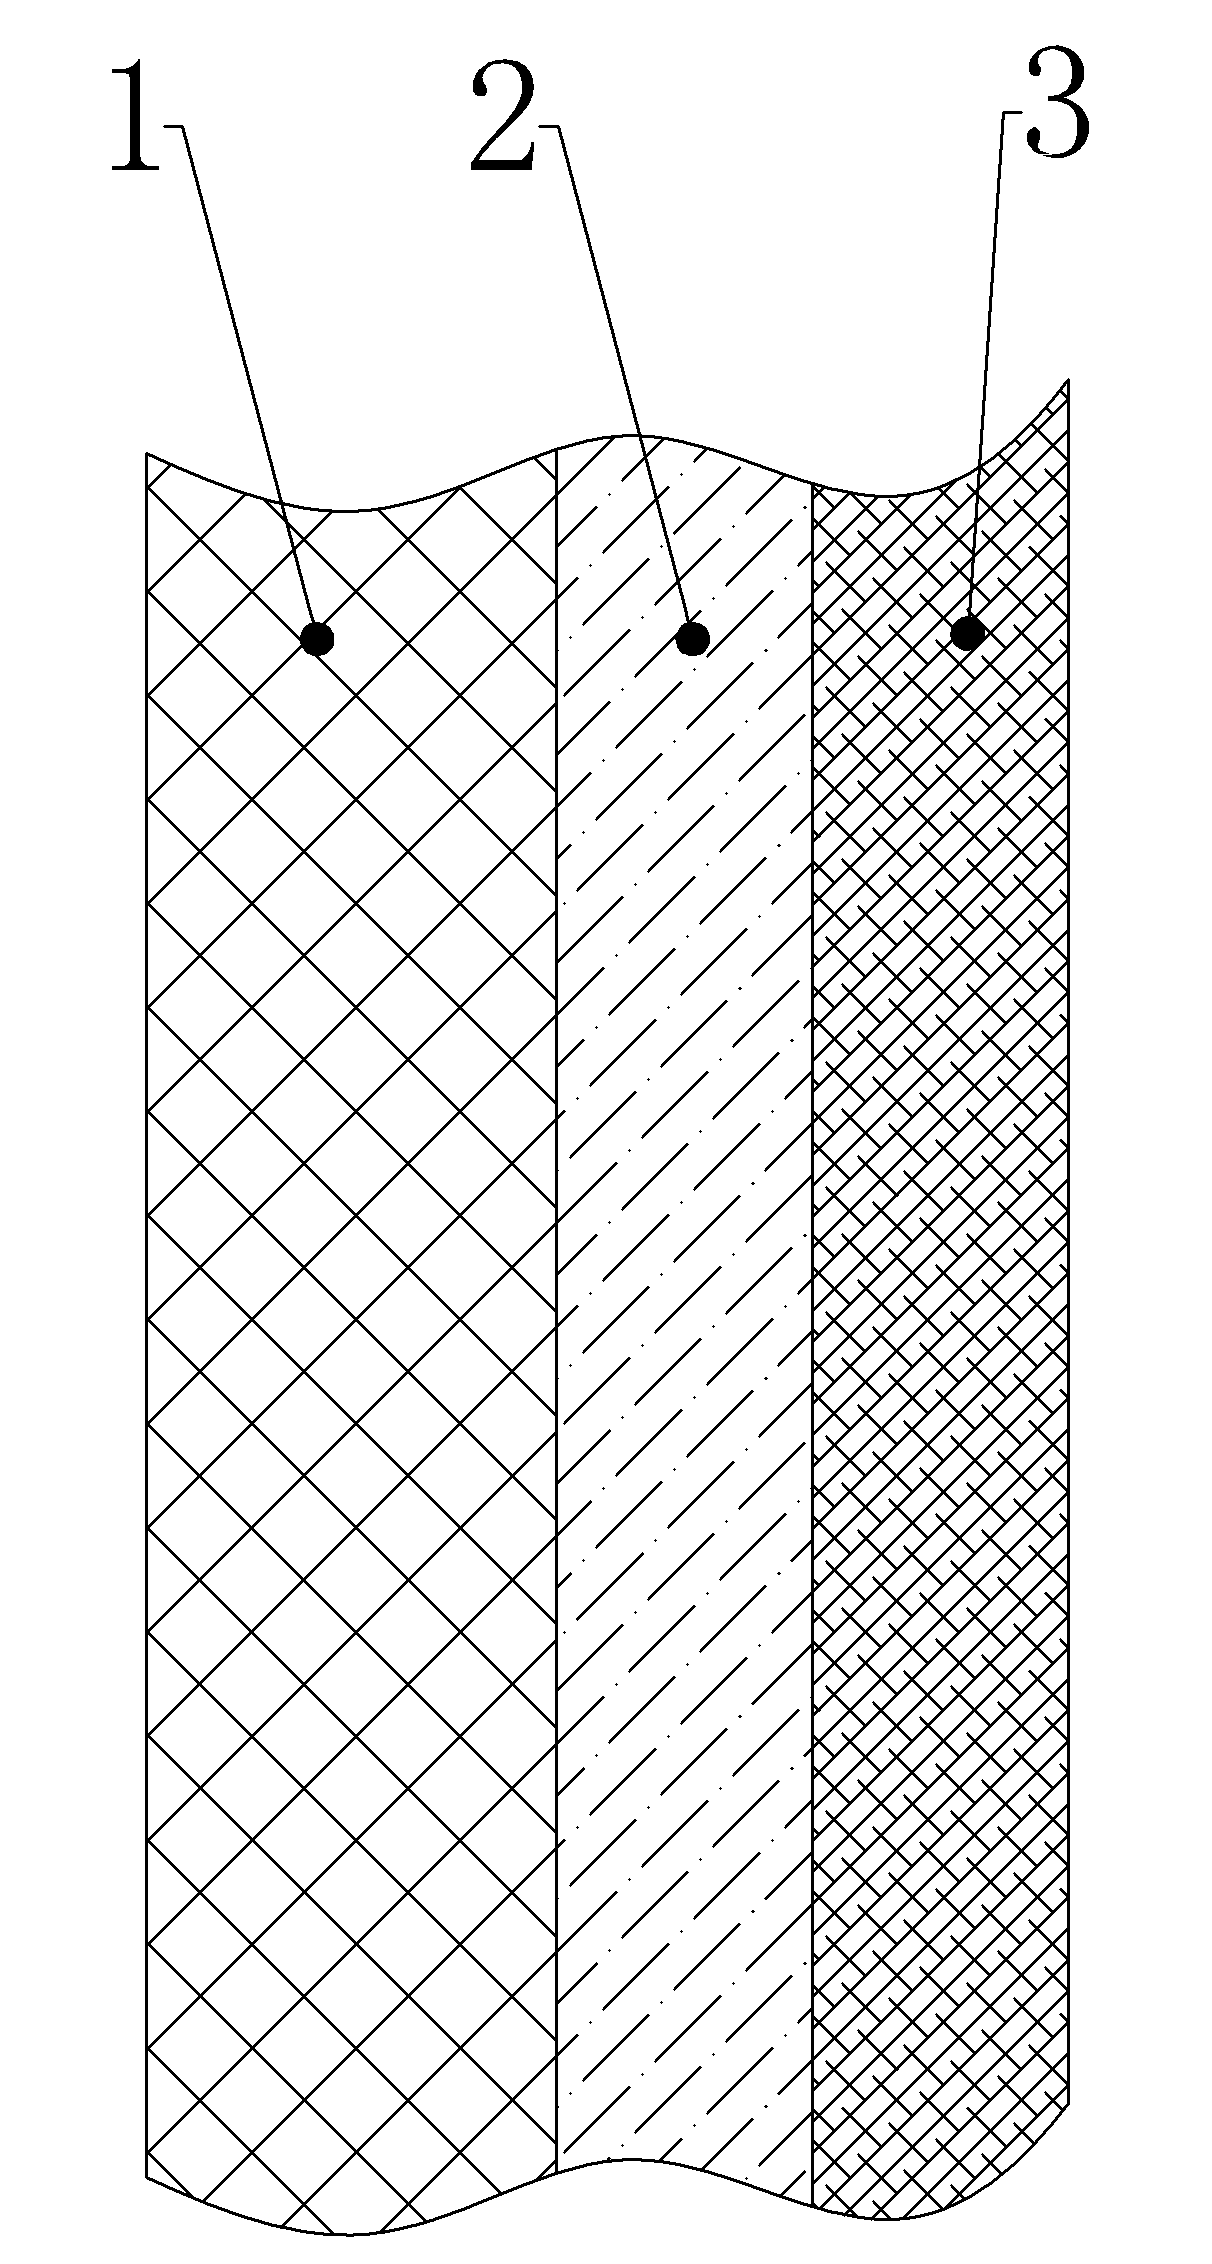 Gaseous diffusion layer of proton exchange membrane fuel cell and preparation method thereof